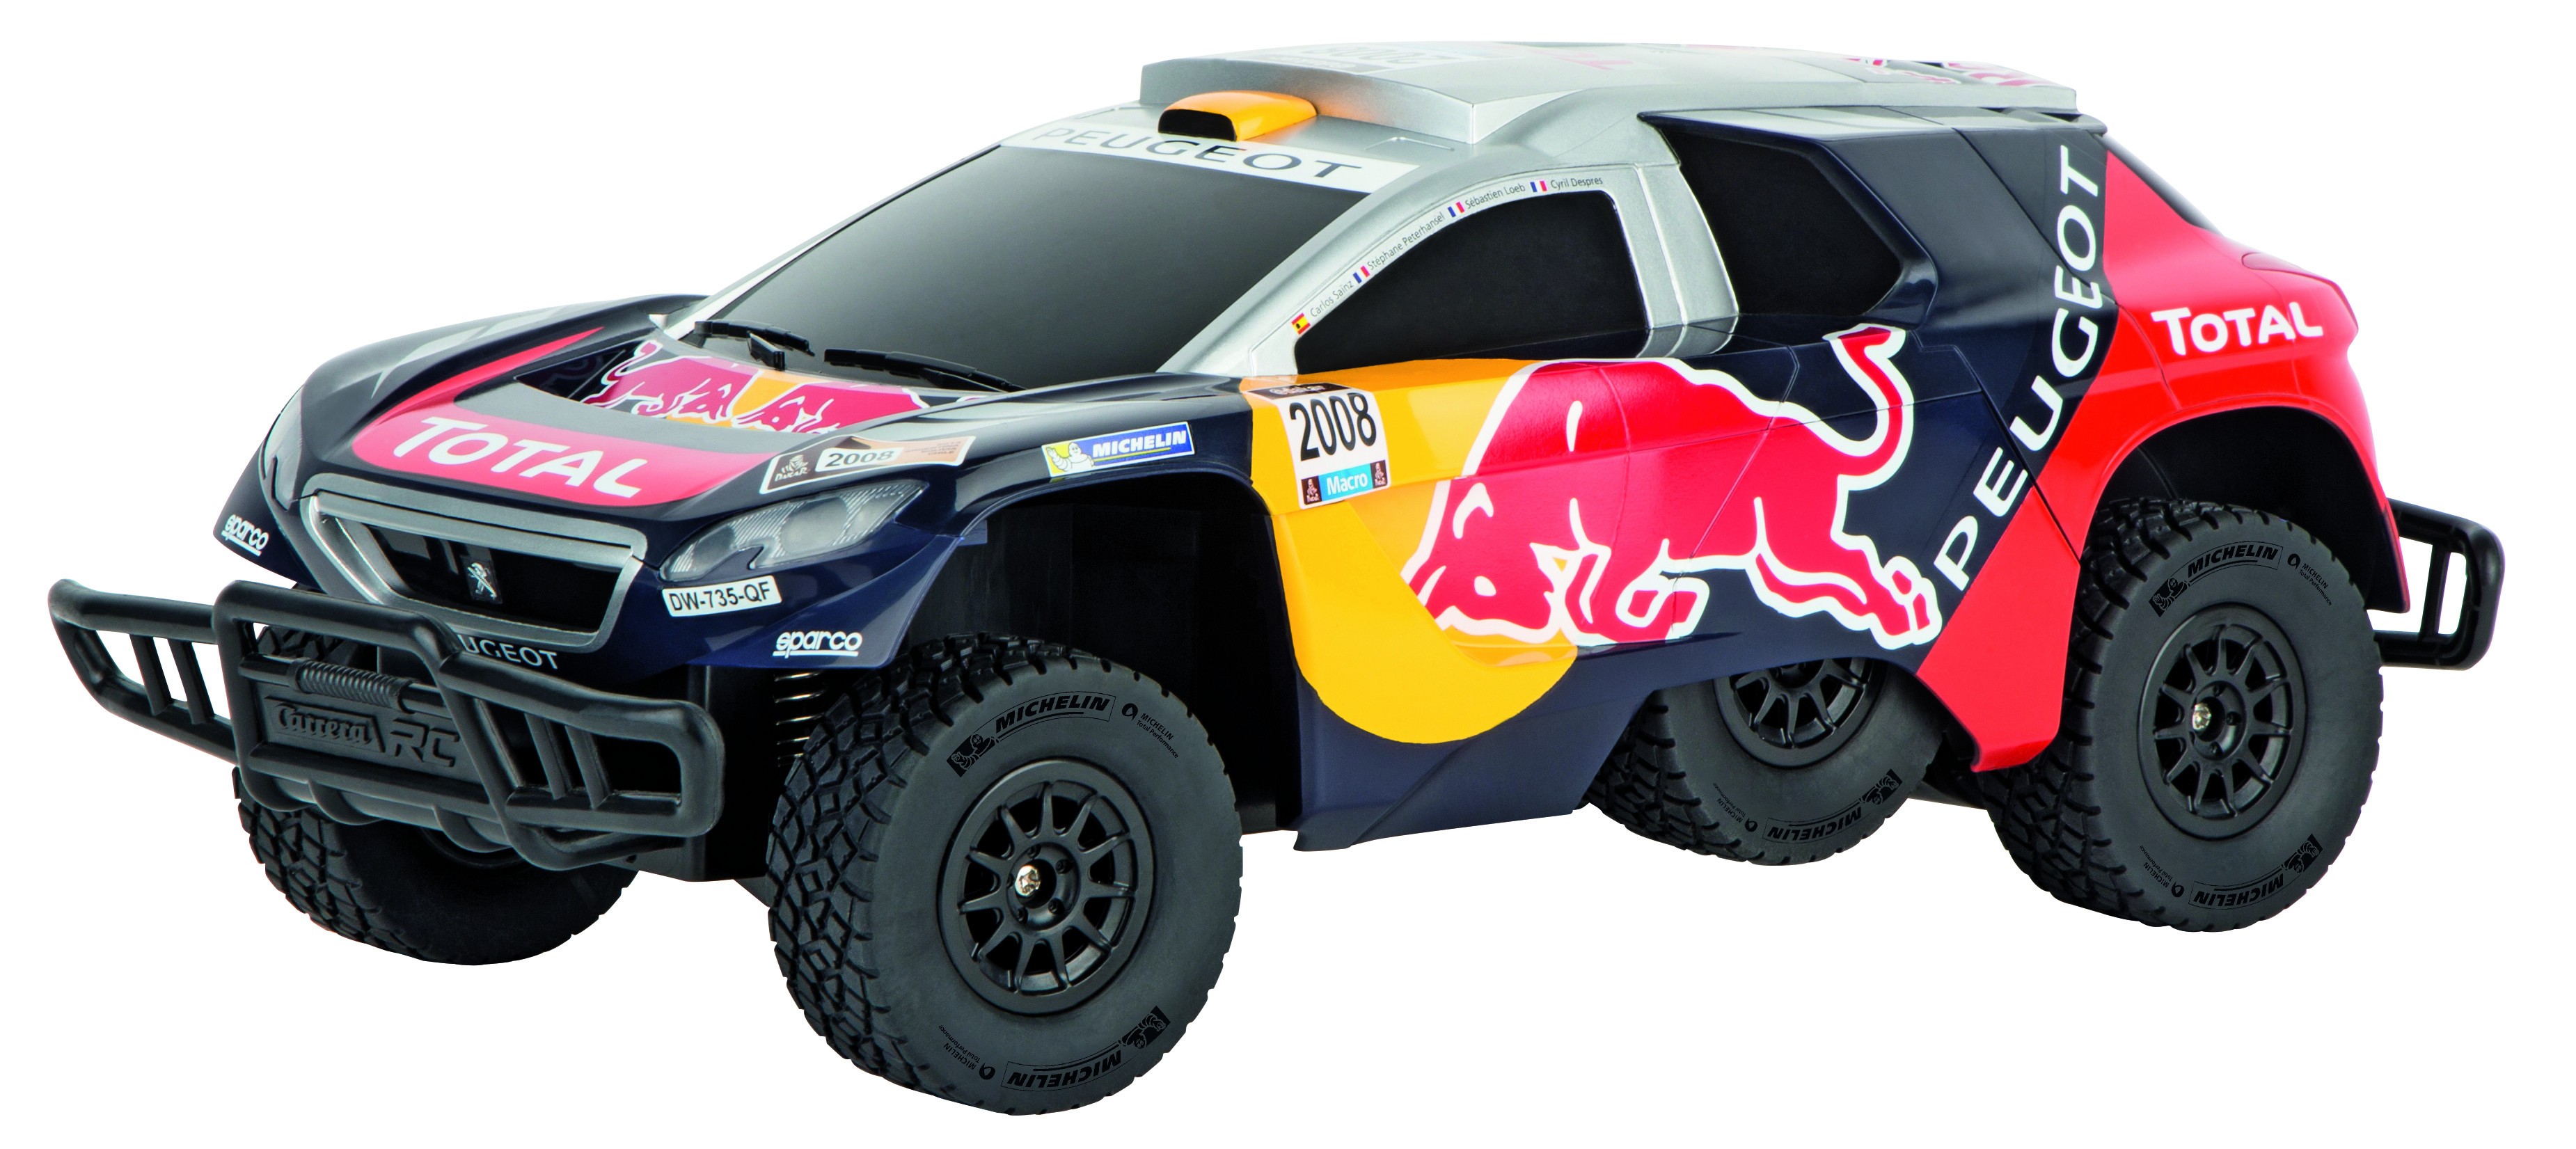 Buggy Carrera Peugeot 08 DKR 16 - Red Bull- 1/16 - Buggy rc